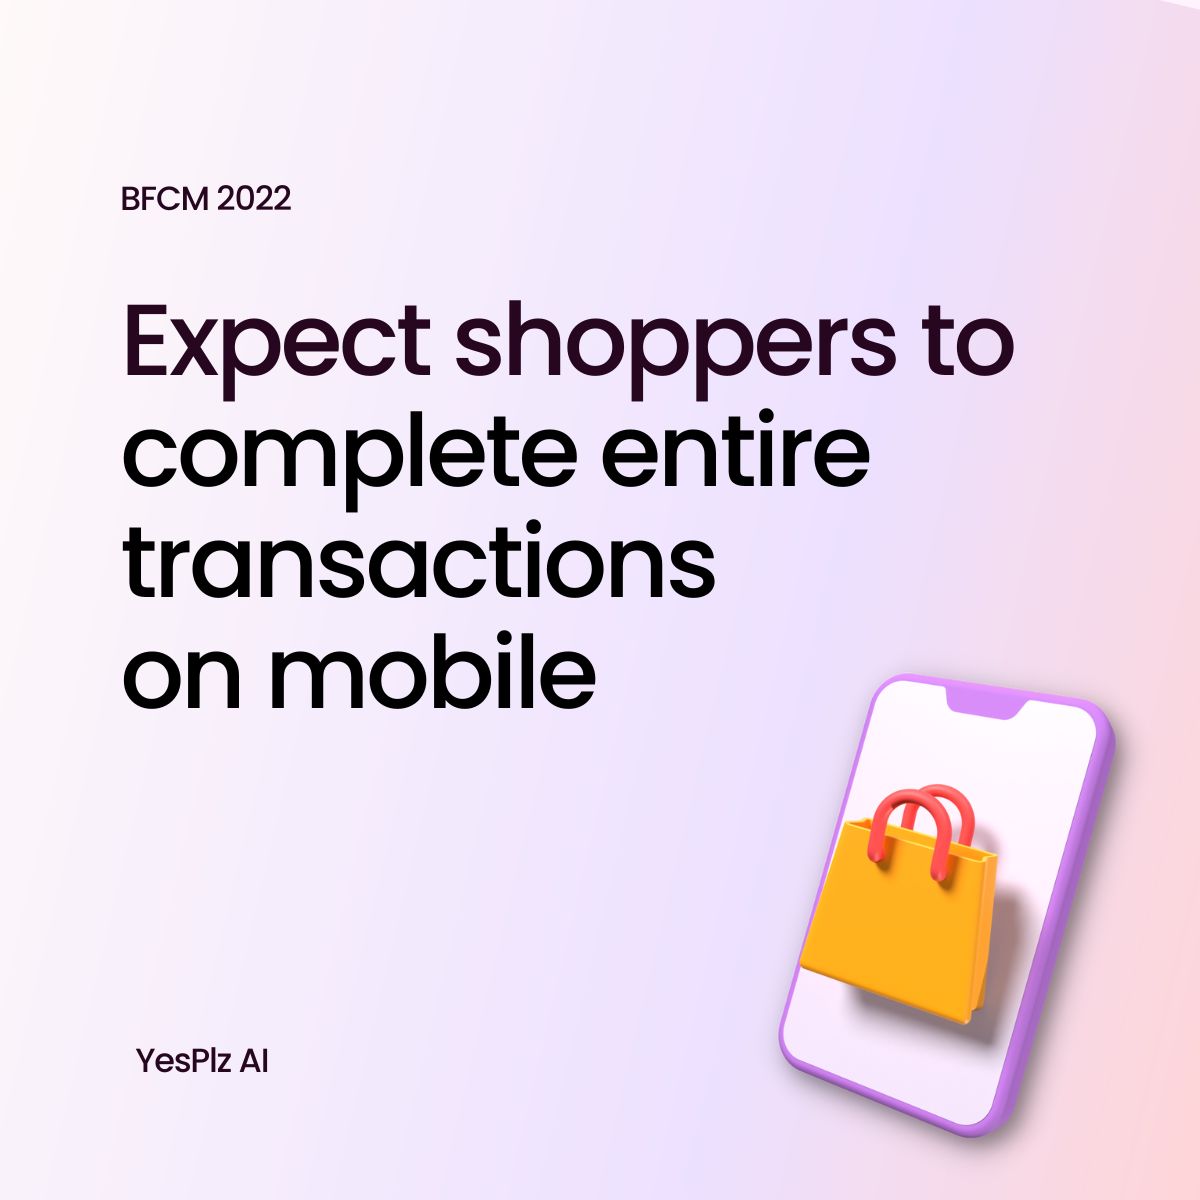 Expect shoppers to complete transactions on mobile this BFCM, against a gradient background